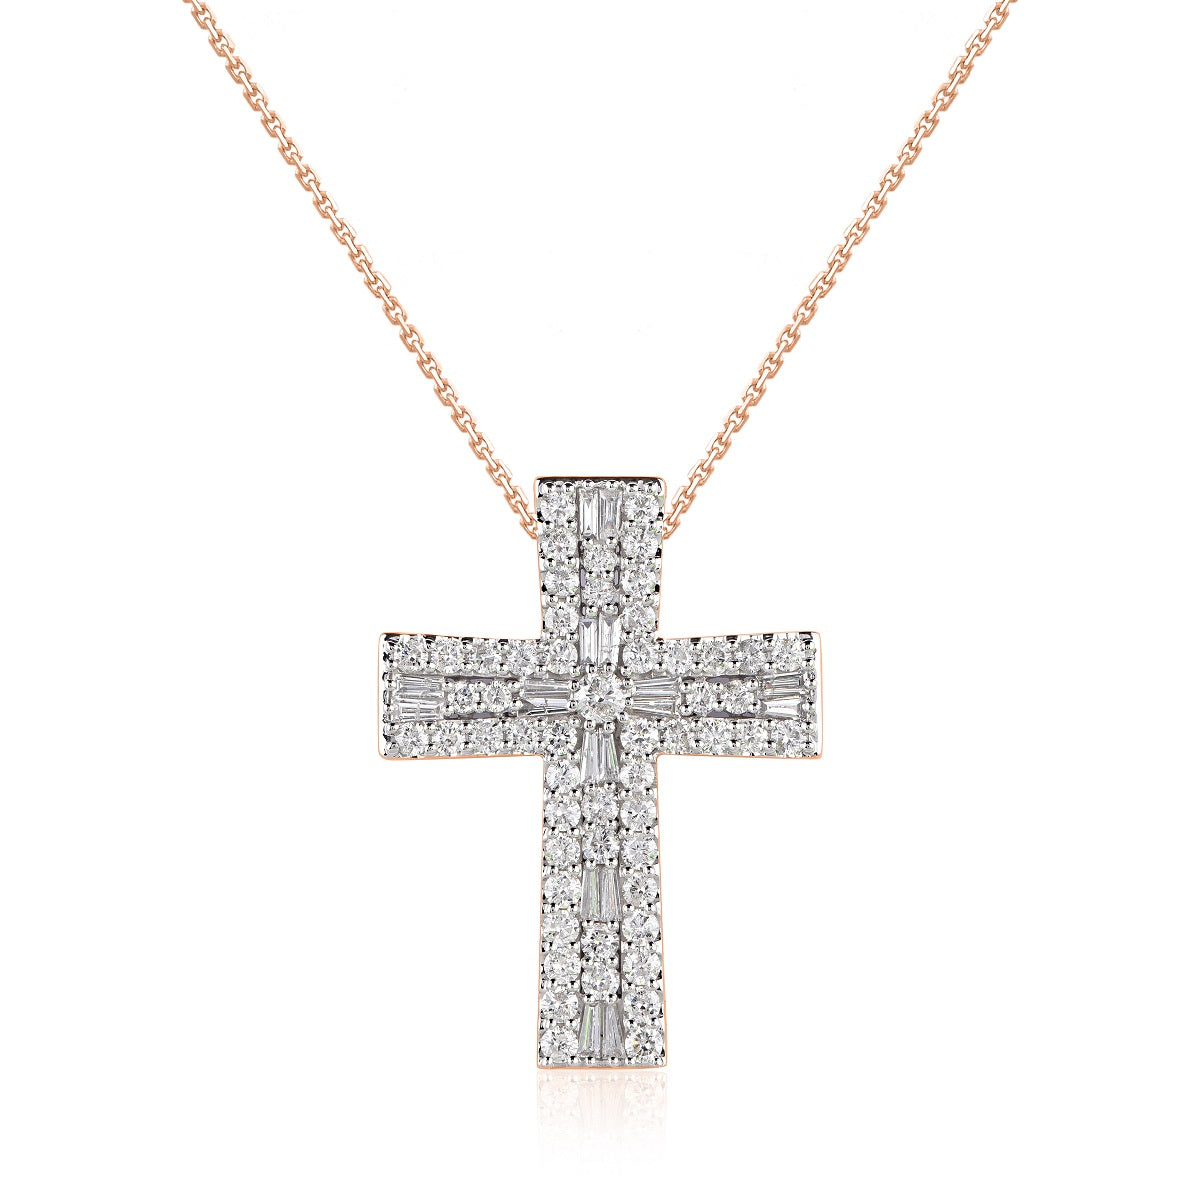 Religious Cross Pendant Necklace in 14K Gold